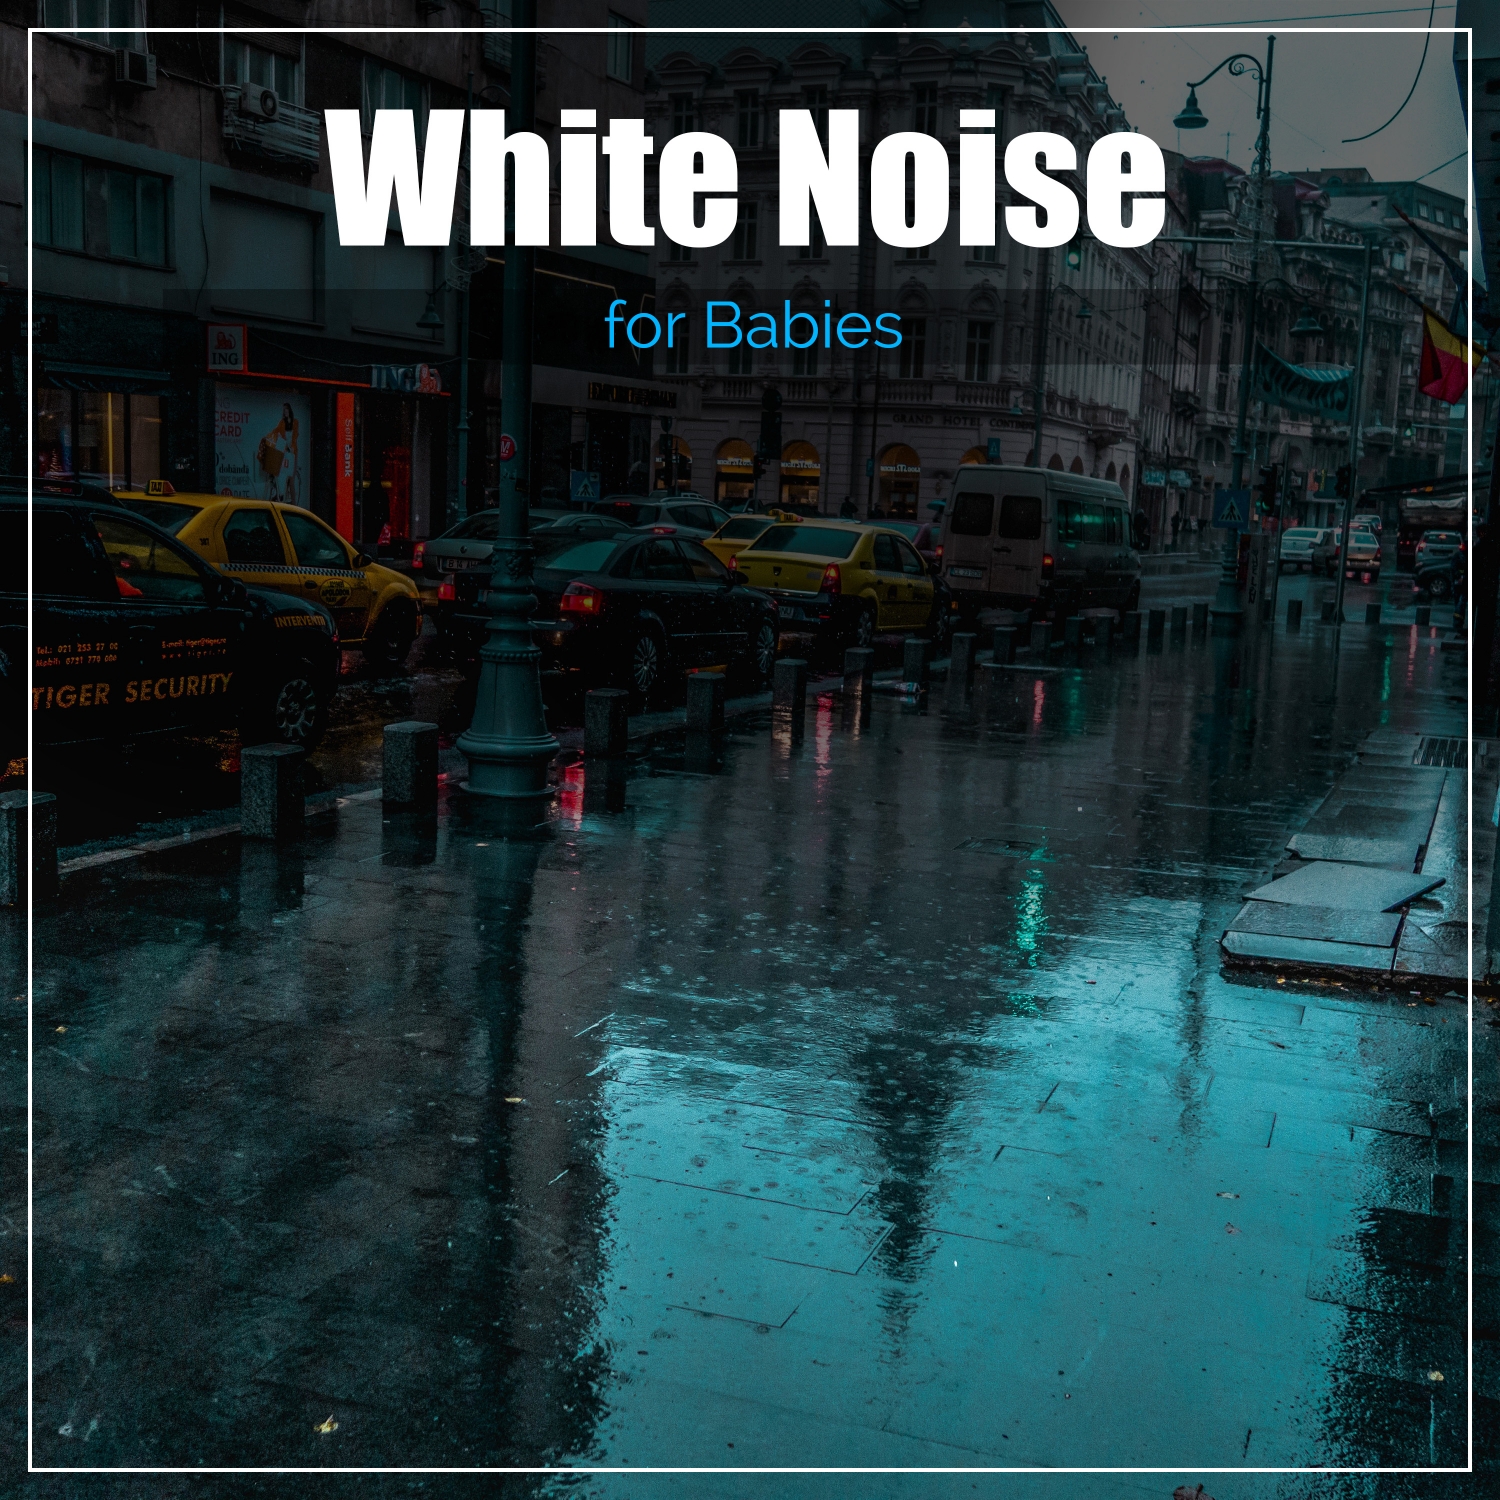 14 White Noise for Babies and Adults - Drift Away Peacefully and Loop While You Sleep